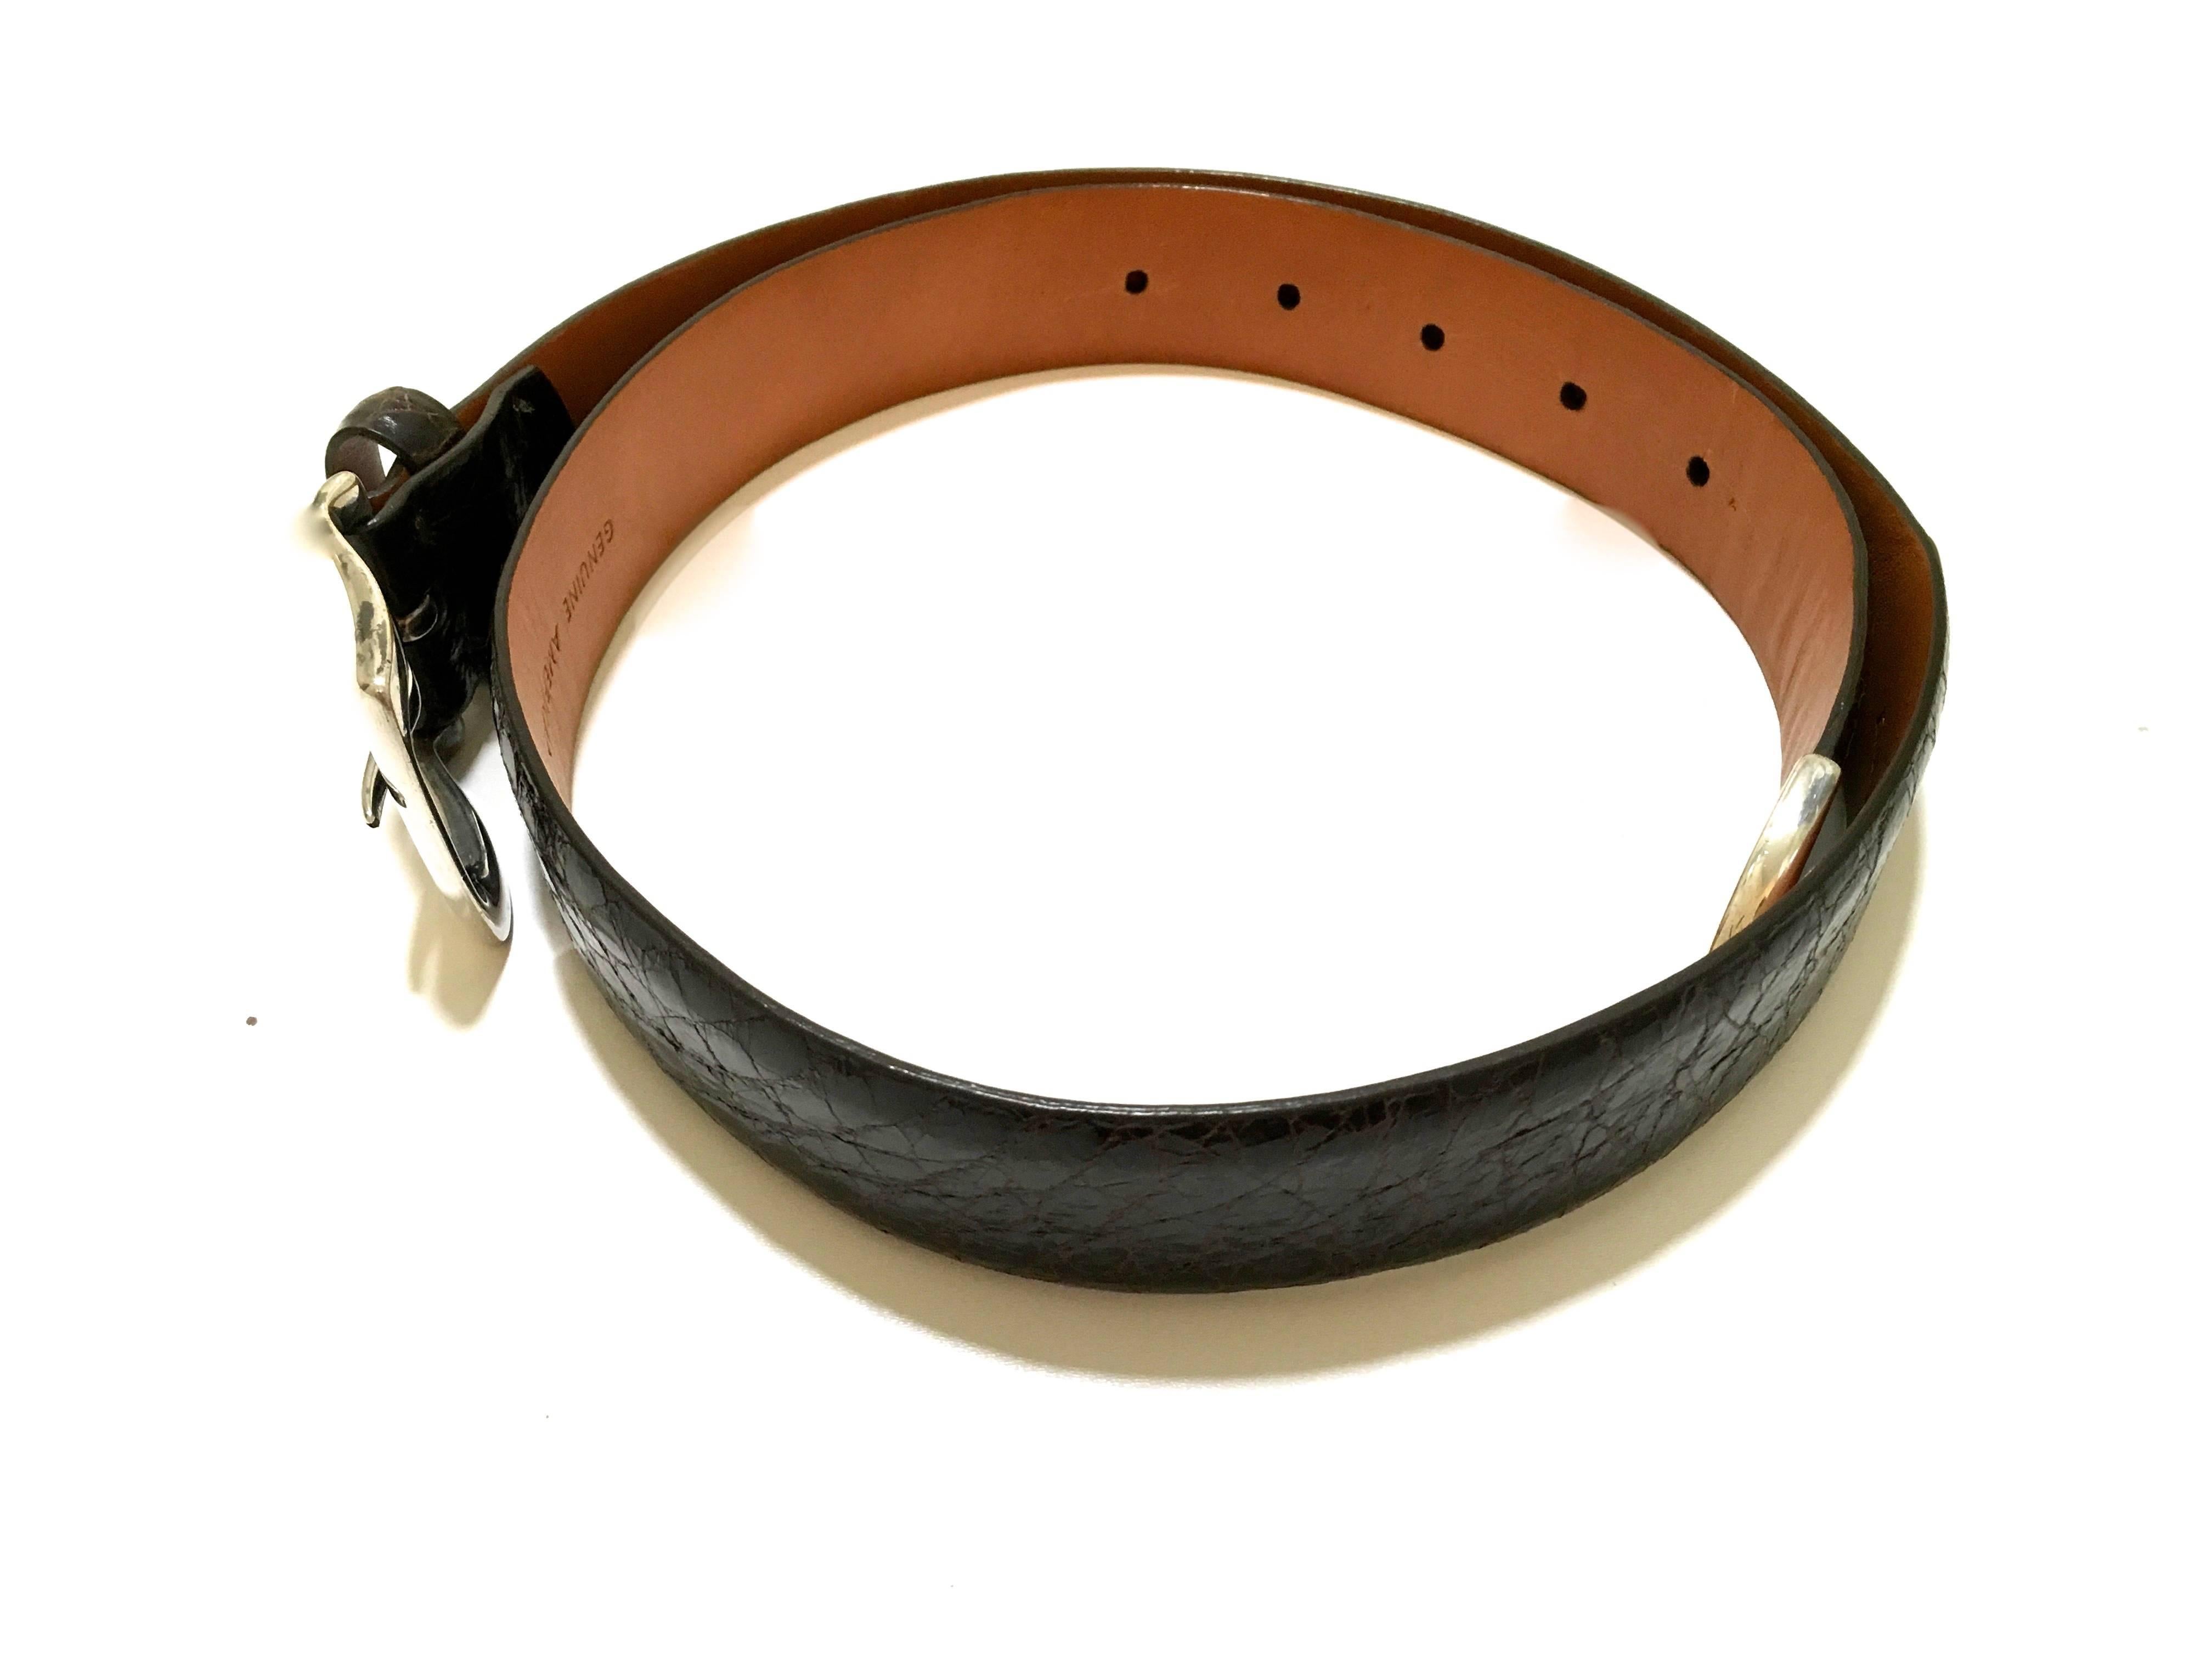 Presented here is a beautiful belt from Ralph Lauren Collection. The belt is made from dark brown alligator and has a gorgeously crafted sterling silver buckle. The tip of the belt is also crafted from sterling silver. The belt is 36 inches in total